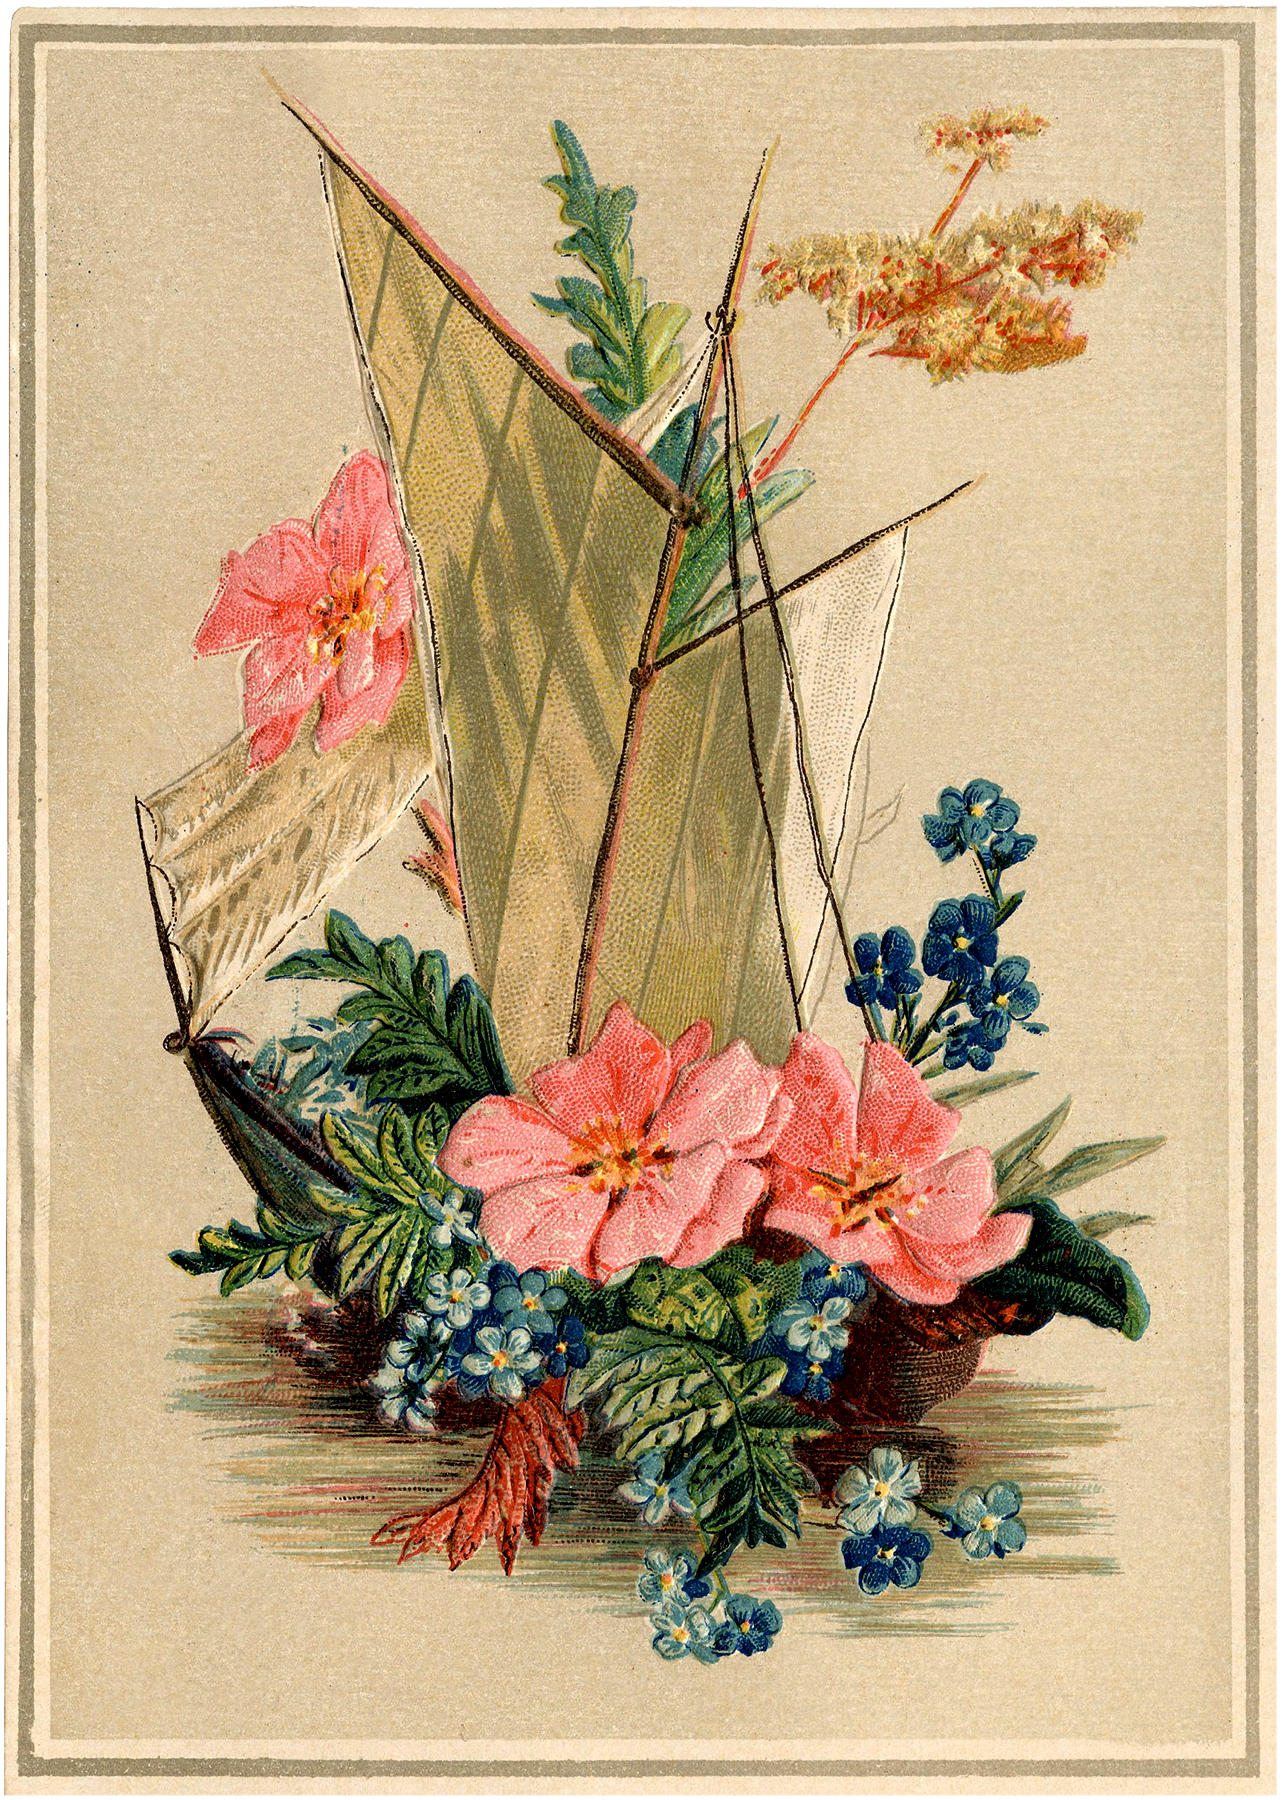 Vintage Sailboat with Flowers Image - Pretty! - The ...